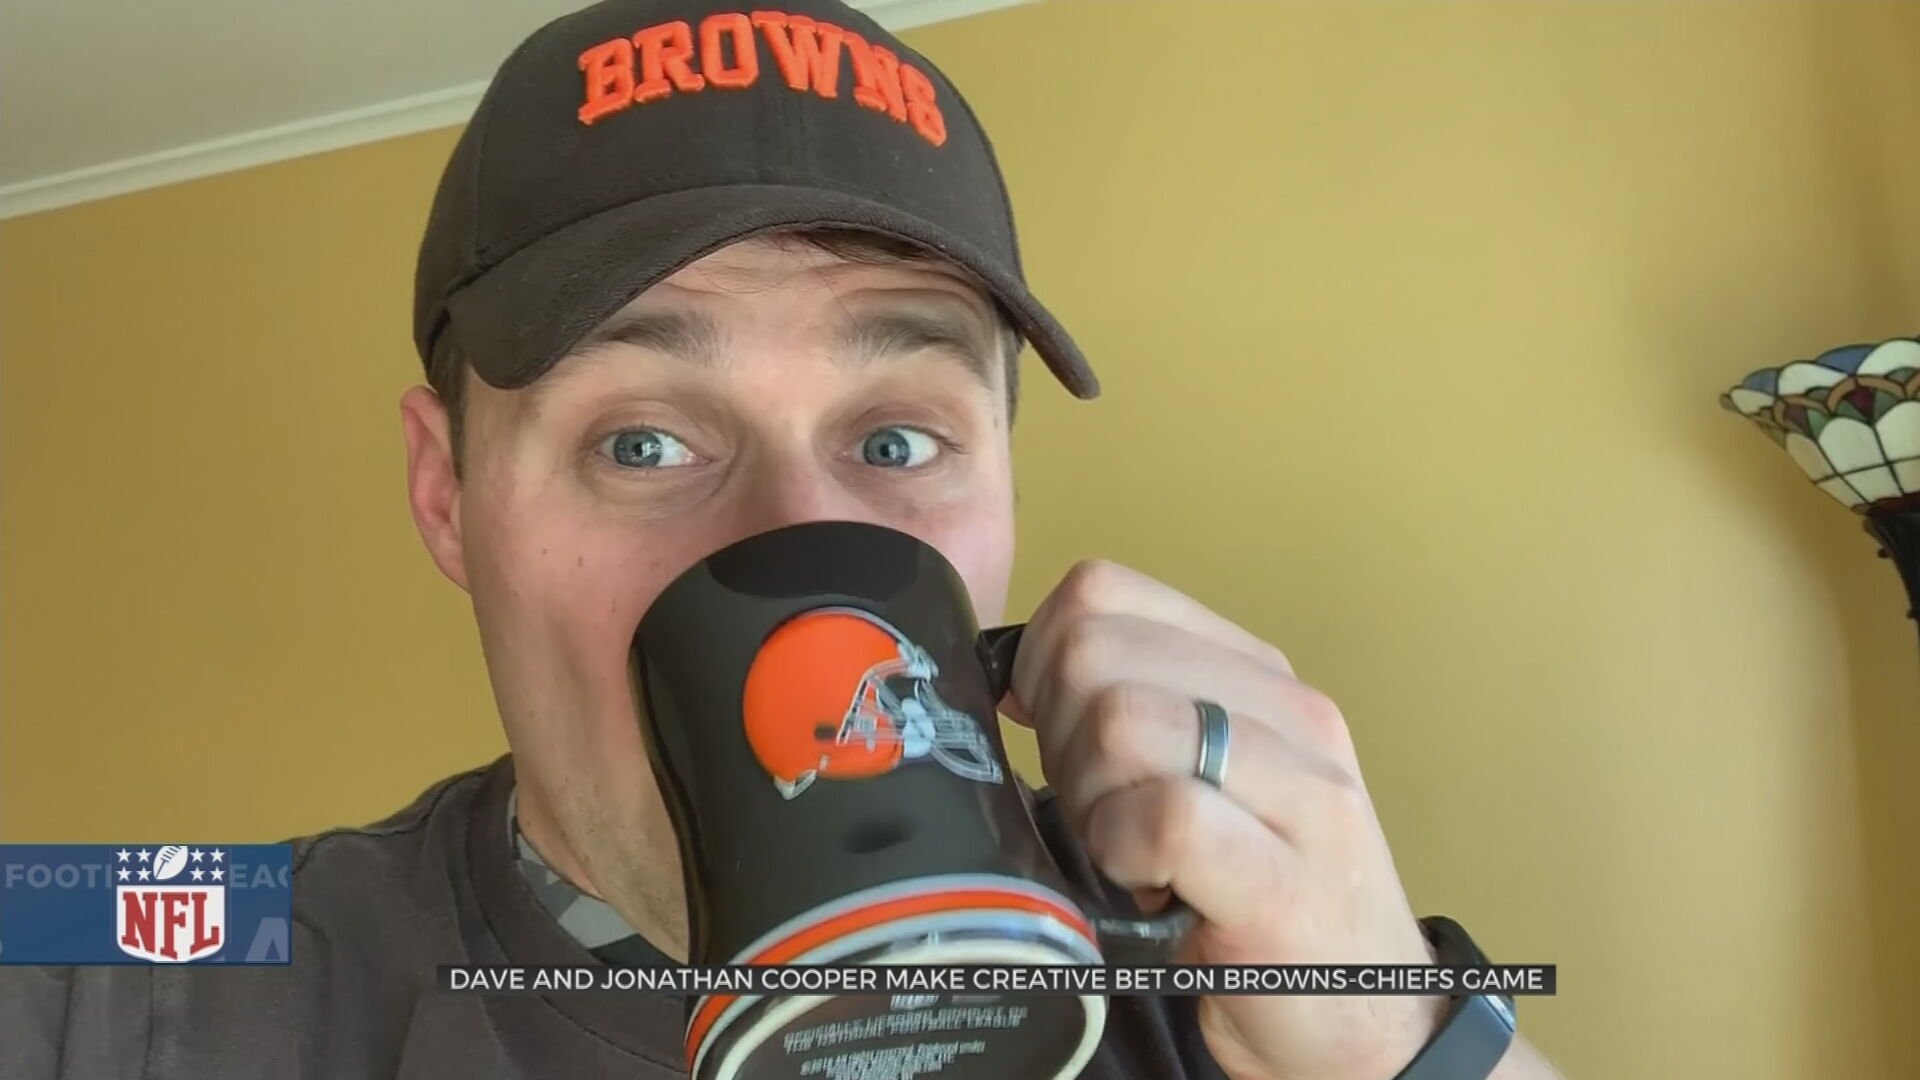 News On 6’s Dave Davis & Jonathan Cooper Make Friendly Bet On Browns-Chiefs Game